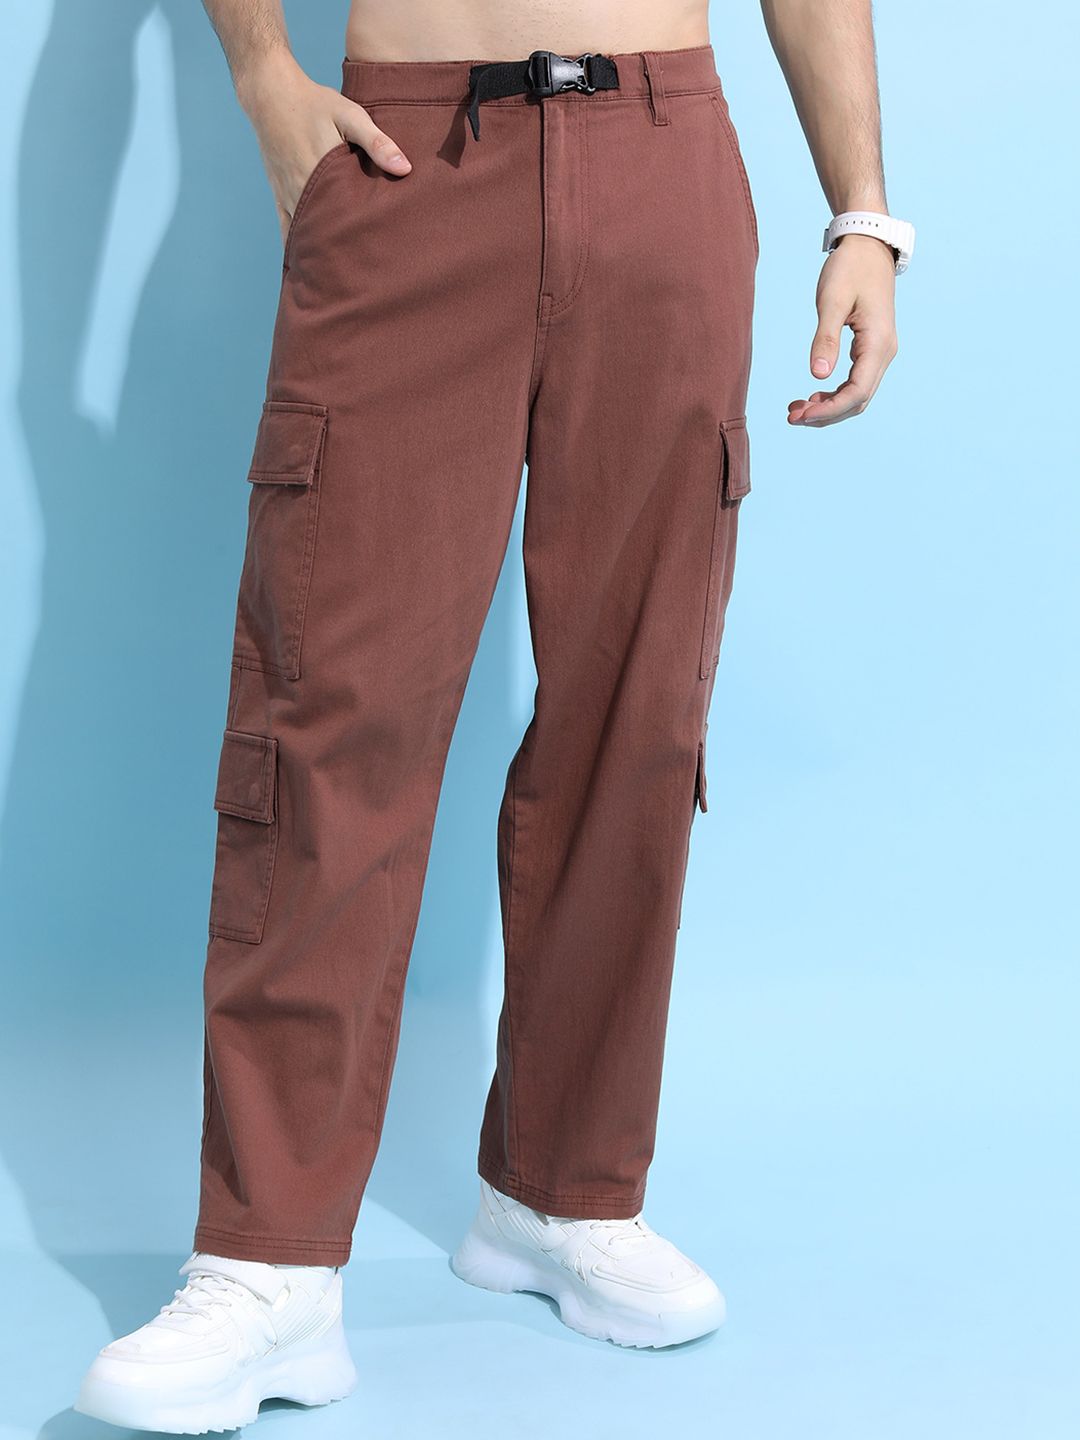 Super High Waisted Belted Cargo Ankle Pant